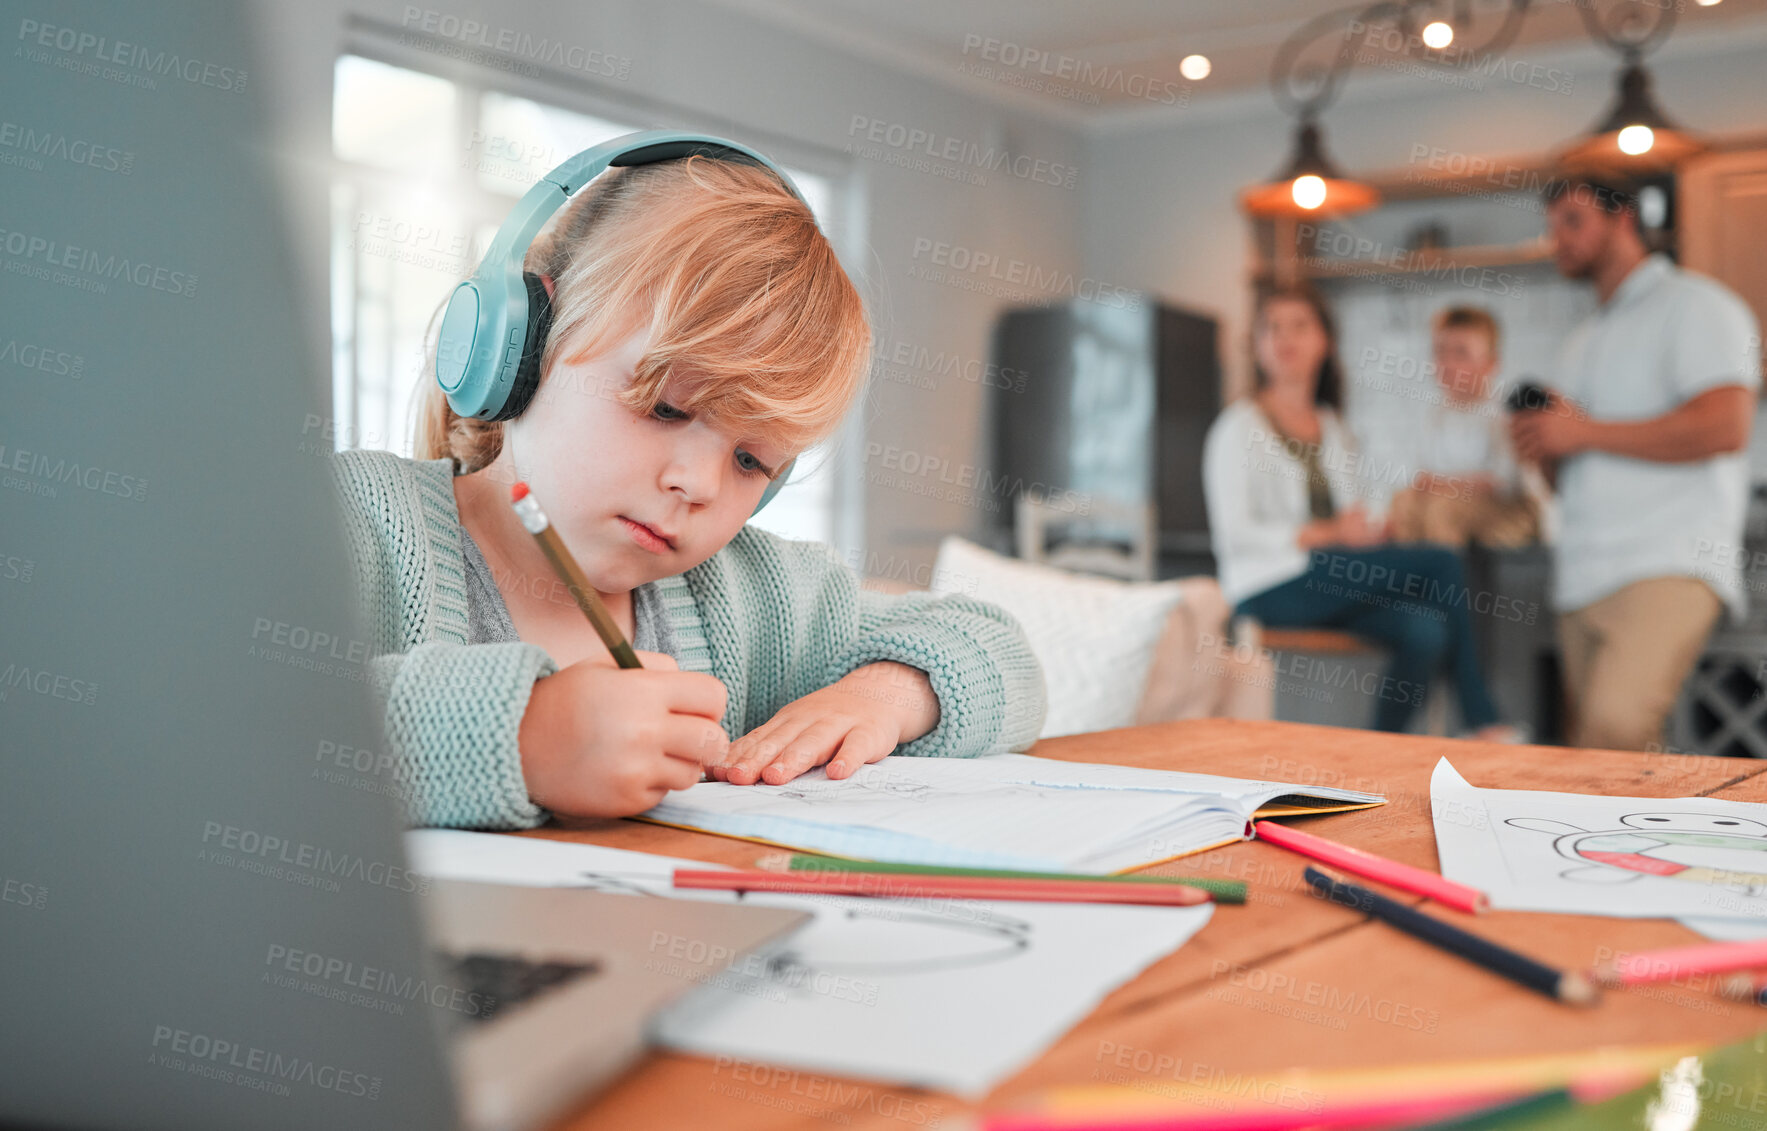 Buy stock photo Closeup of a cute caucasian little brunette girl wearing wireless headphones while holding a pencil and being creative by drawing in a book at home with her family in the background. Young girl listening to music with her wireless device with focusing on homework